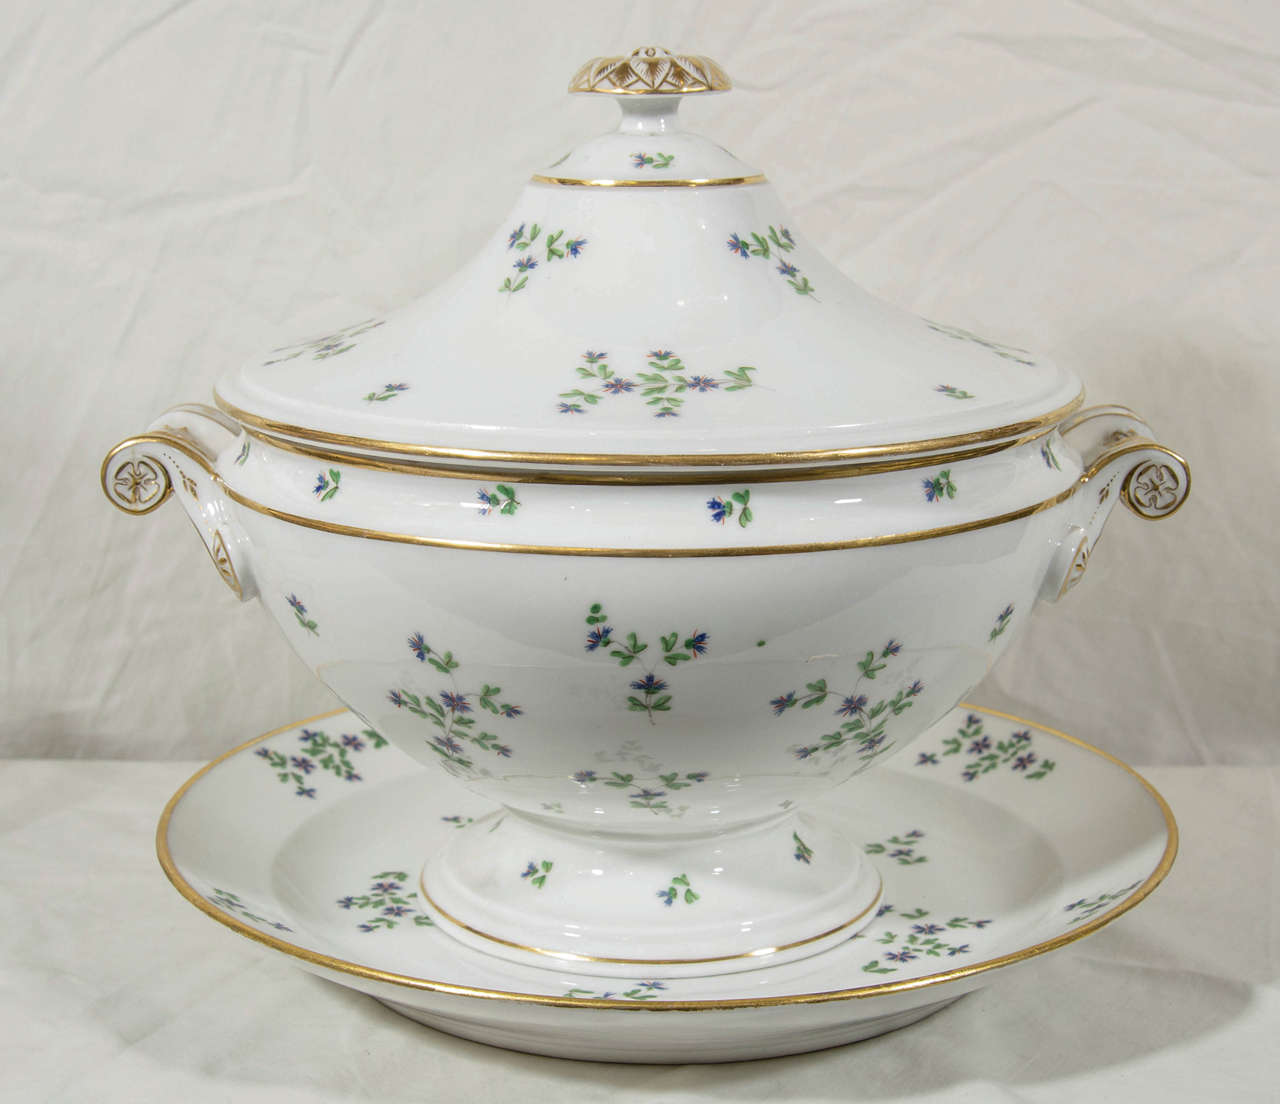 The tureen was manufactured by Nast, one of the exceptional French porcelain makers of the early 19th century. It is made of hard paste porcelain and decorated in the 